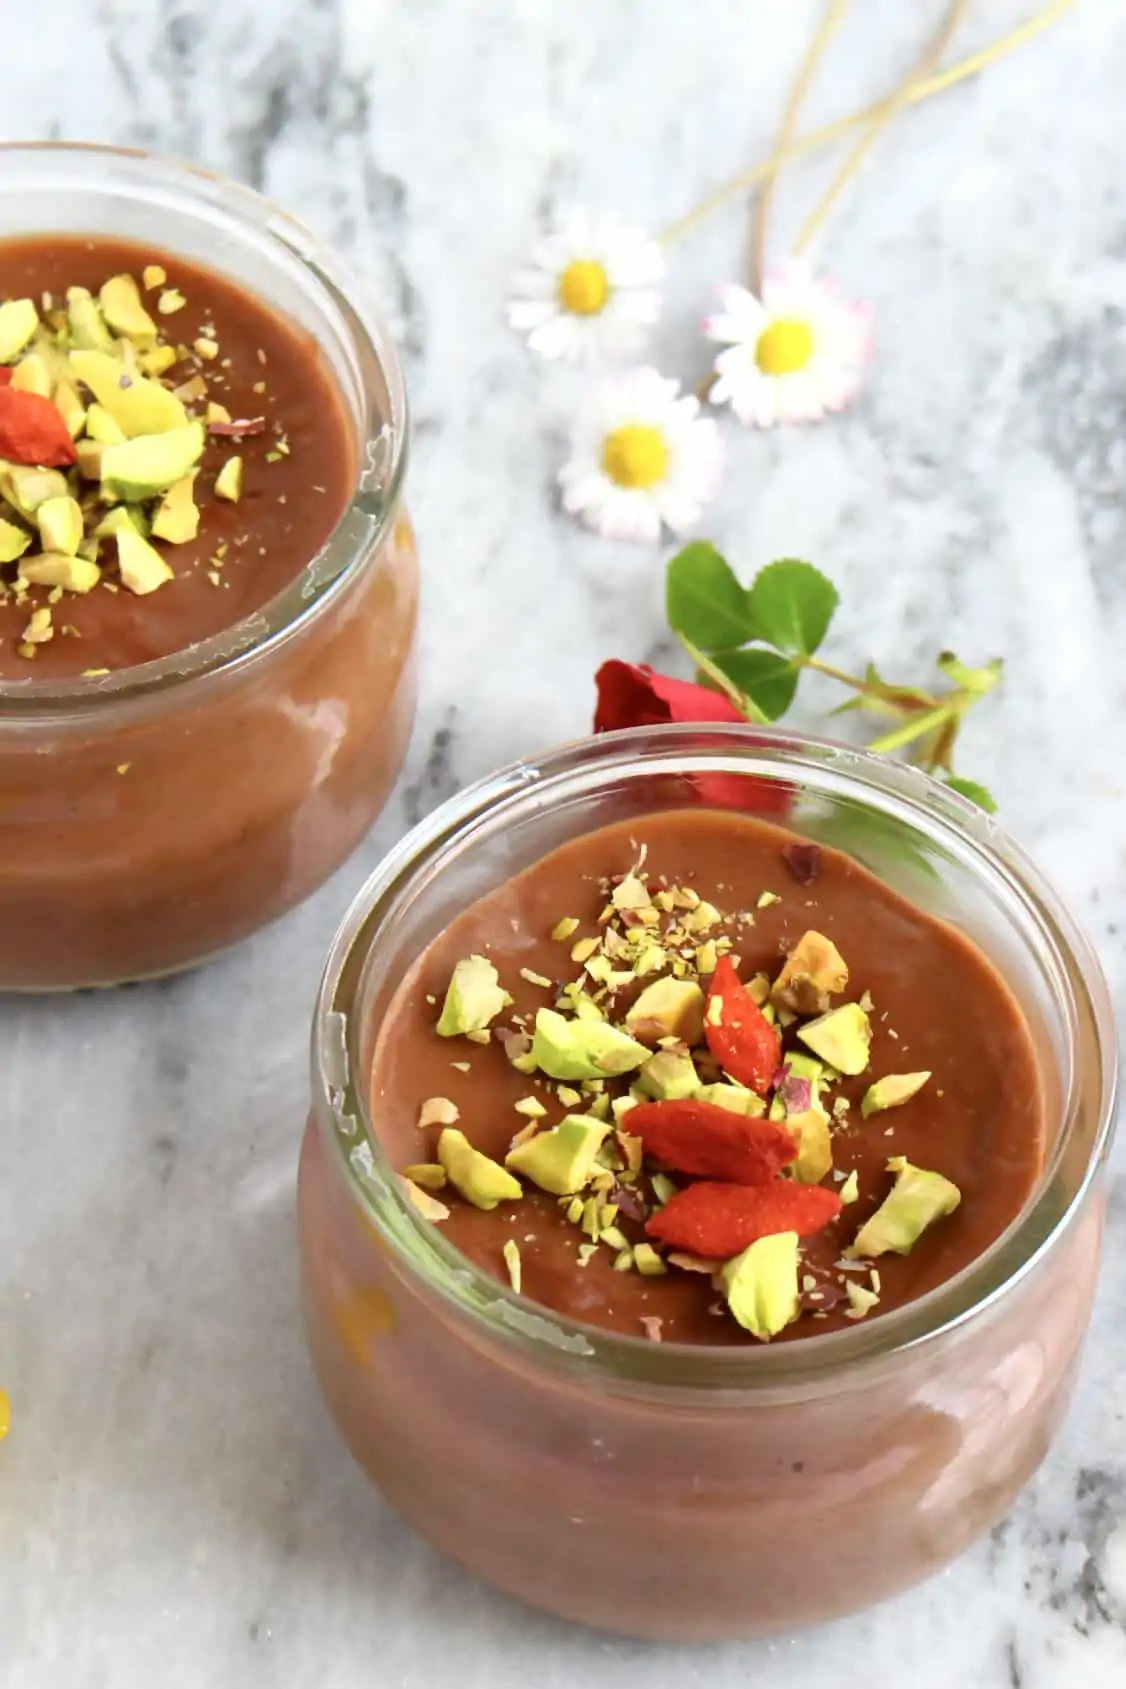 Two vegan chocolate pudding pots topped with chopped pistachios and freeze-dried raspberries